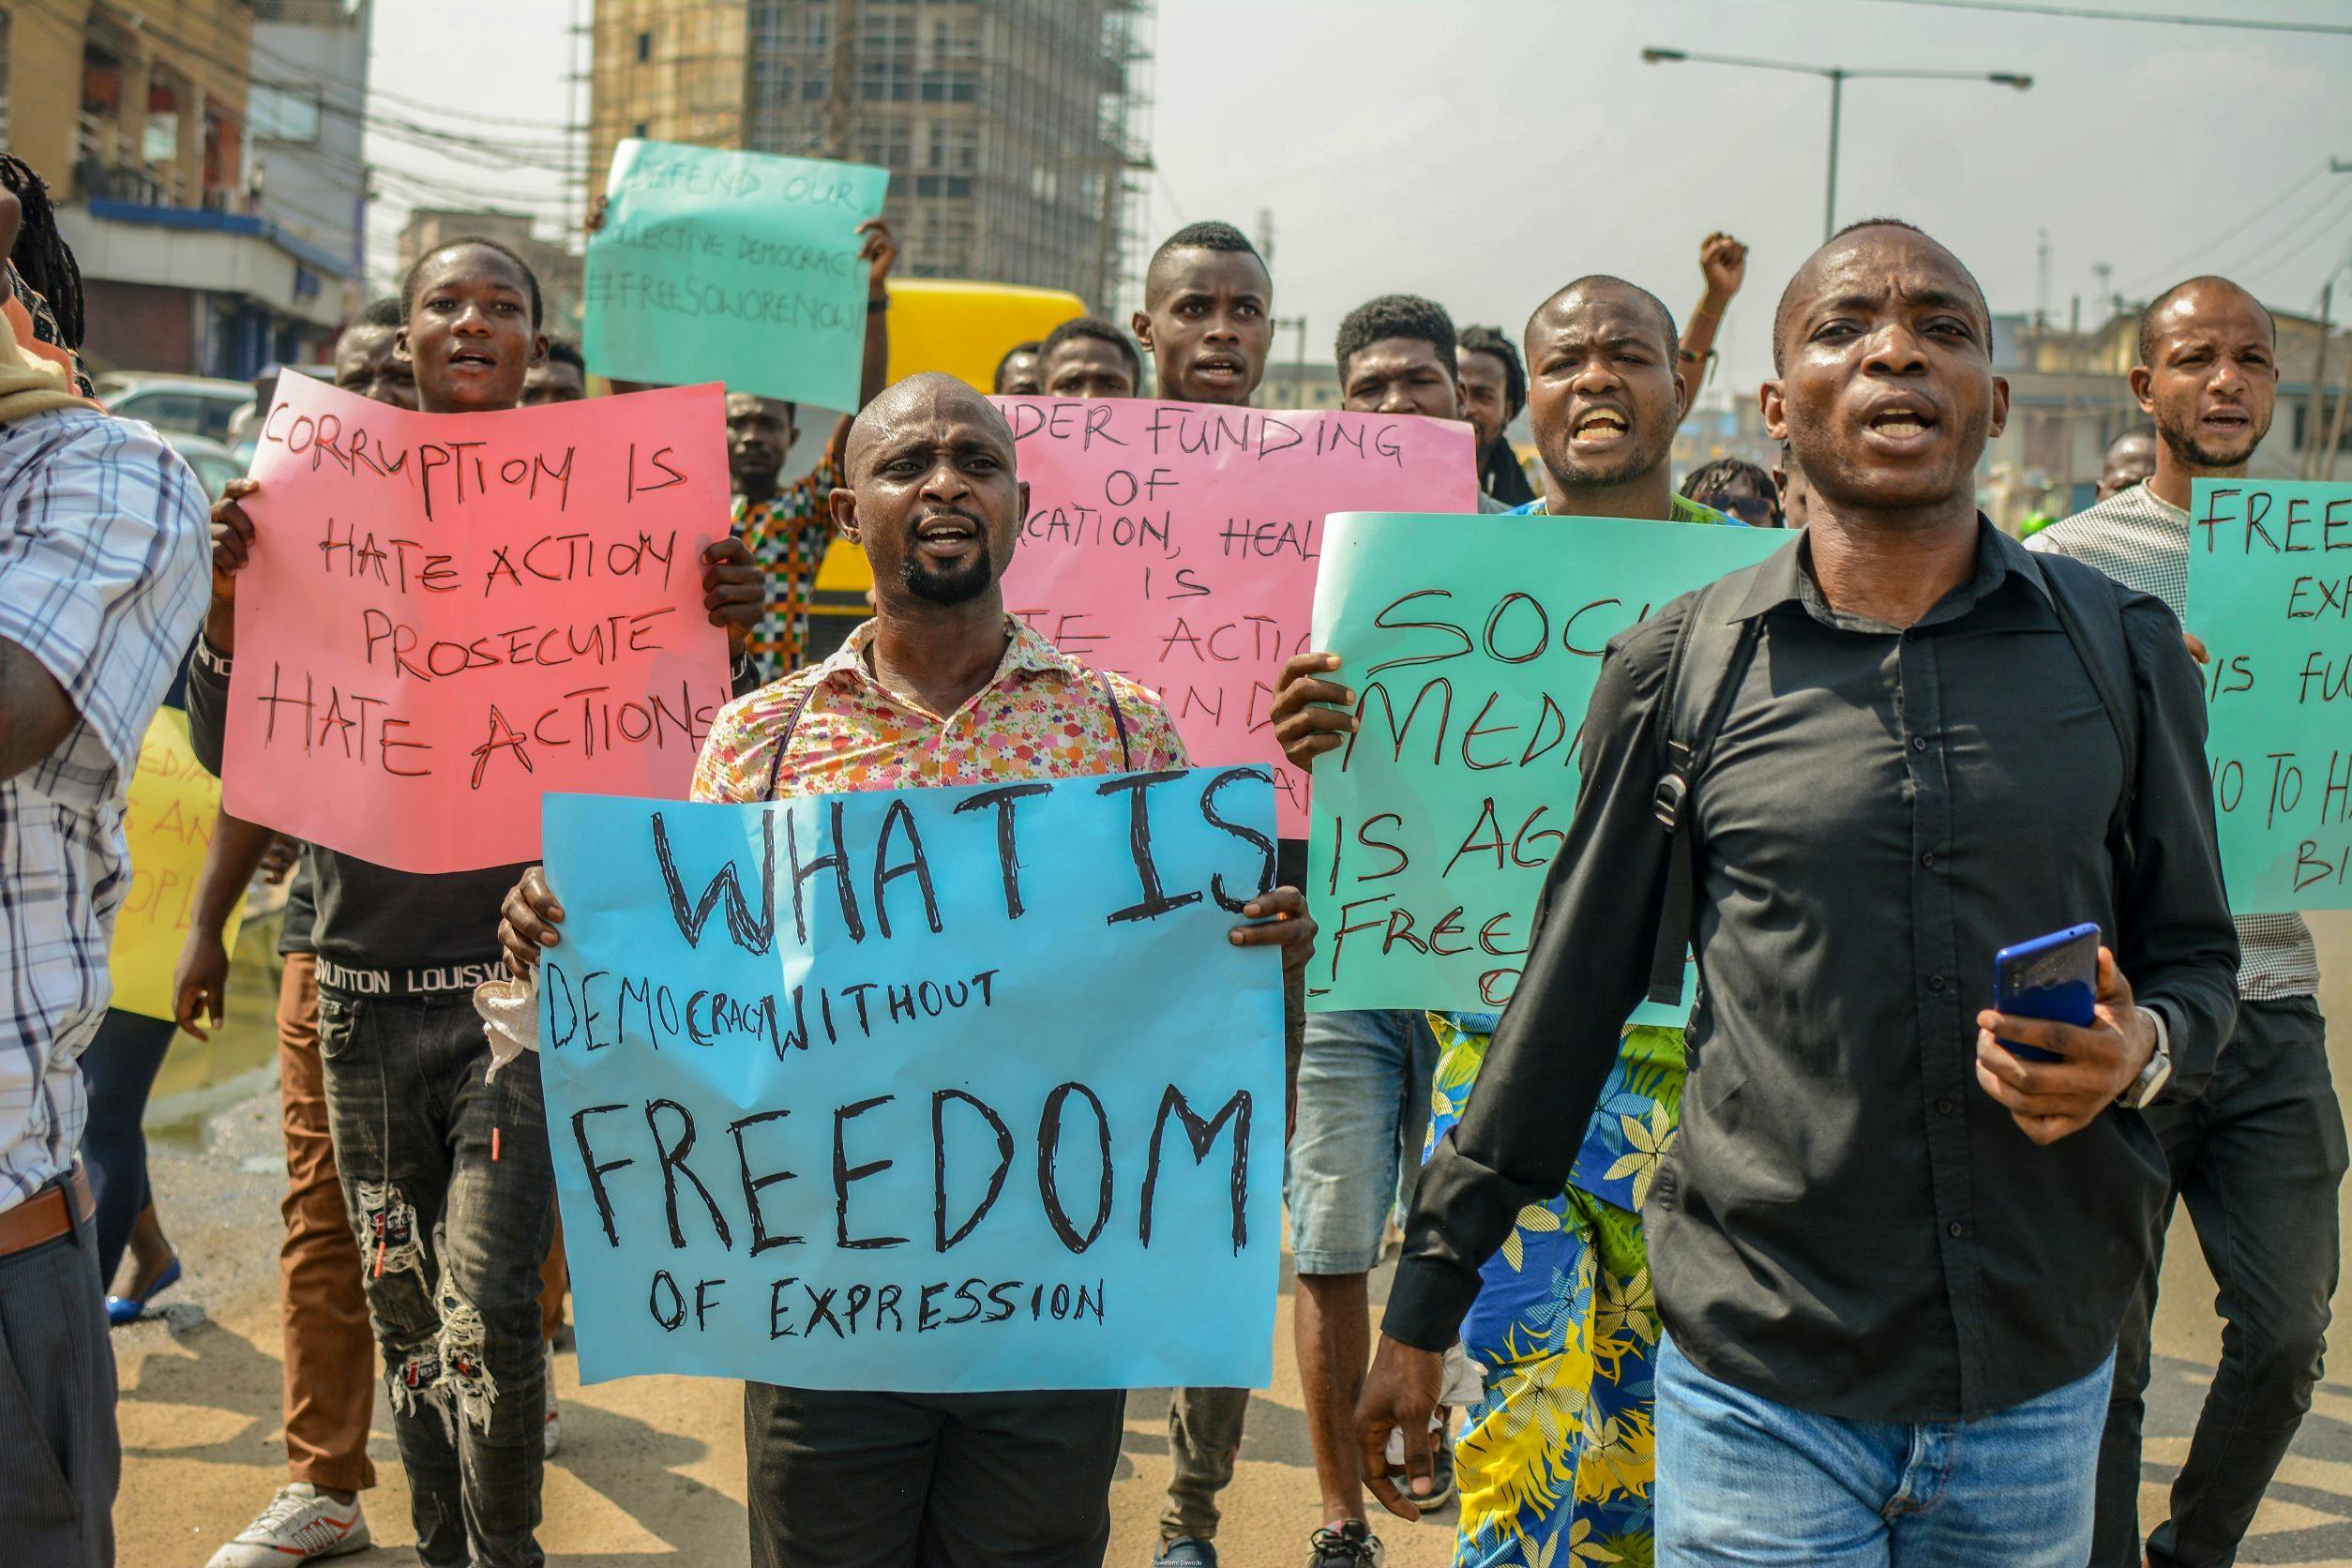 Young activists in Nigeria protesting against the 2019 anti-social media bill; signs read: "what is democracy without freedom of expression" and "corruption is hate action, prosecute hate action"